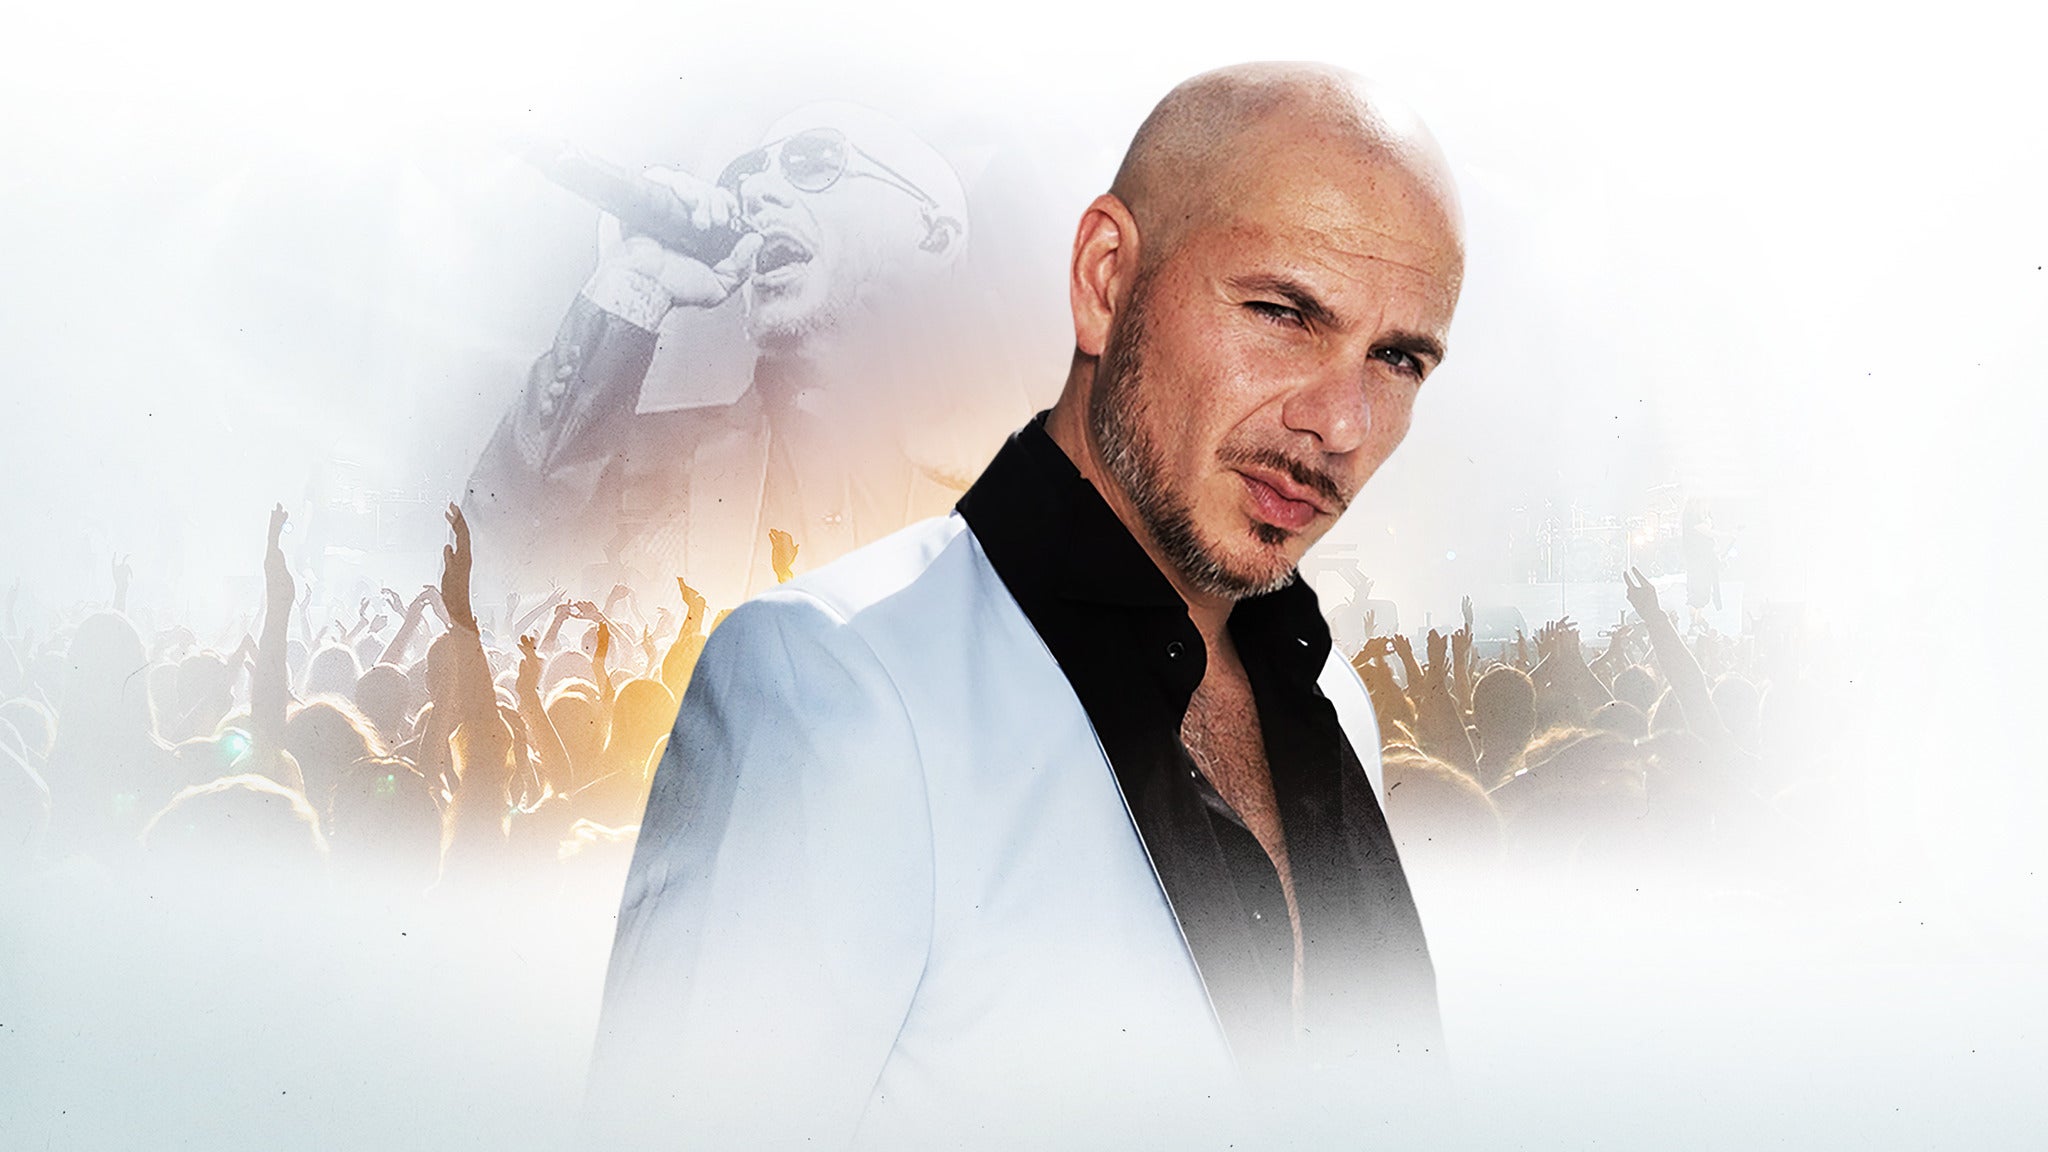 Pitbull pre-sale password for show tickets in Calgary, AB (Scotiabank Saddledome)